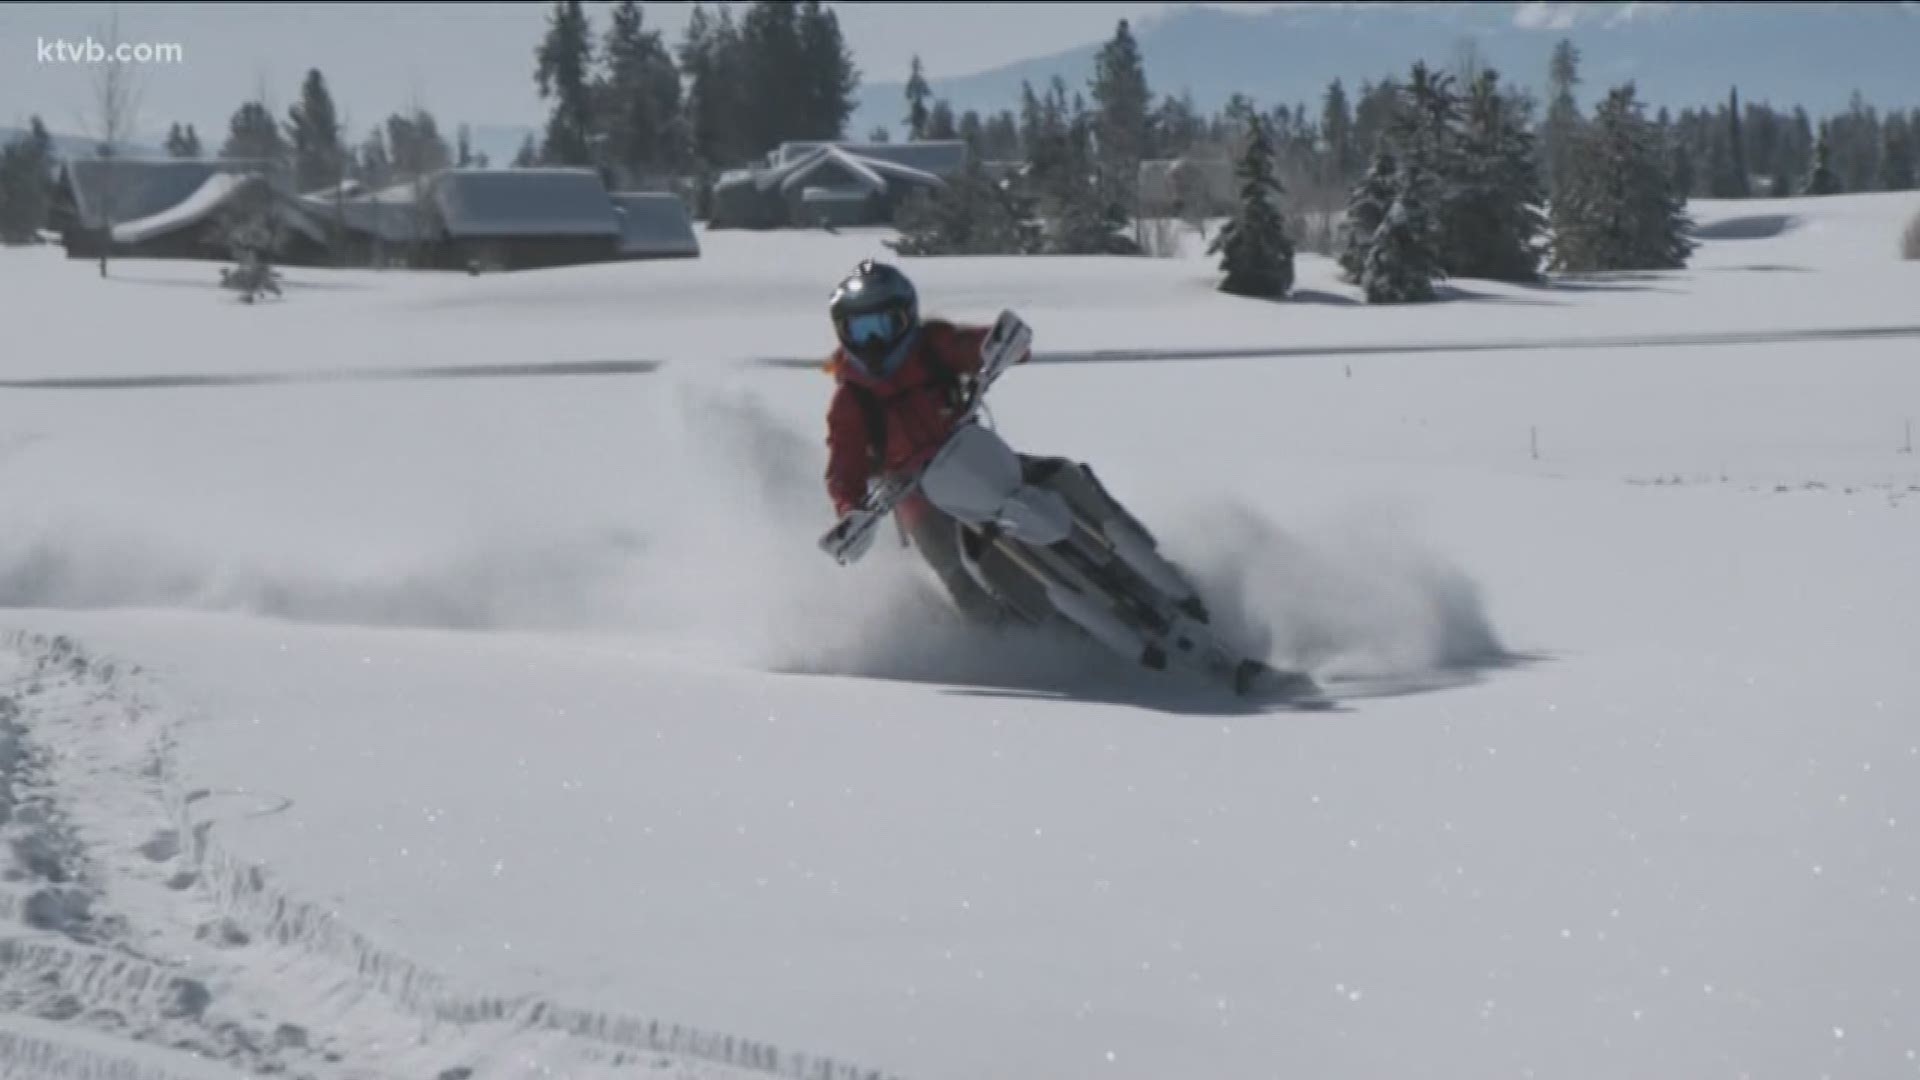 Two decades after Vernal Forbes built the first prototype in his Boise garage, snowbikes are now featured in worldwide in events like the Winter X Games.